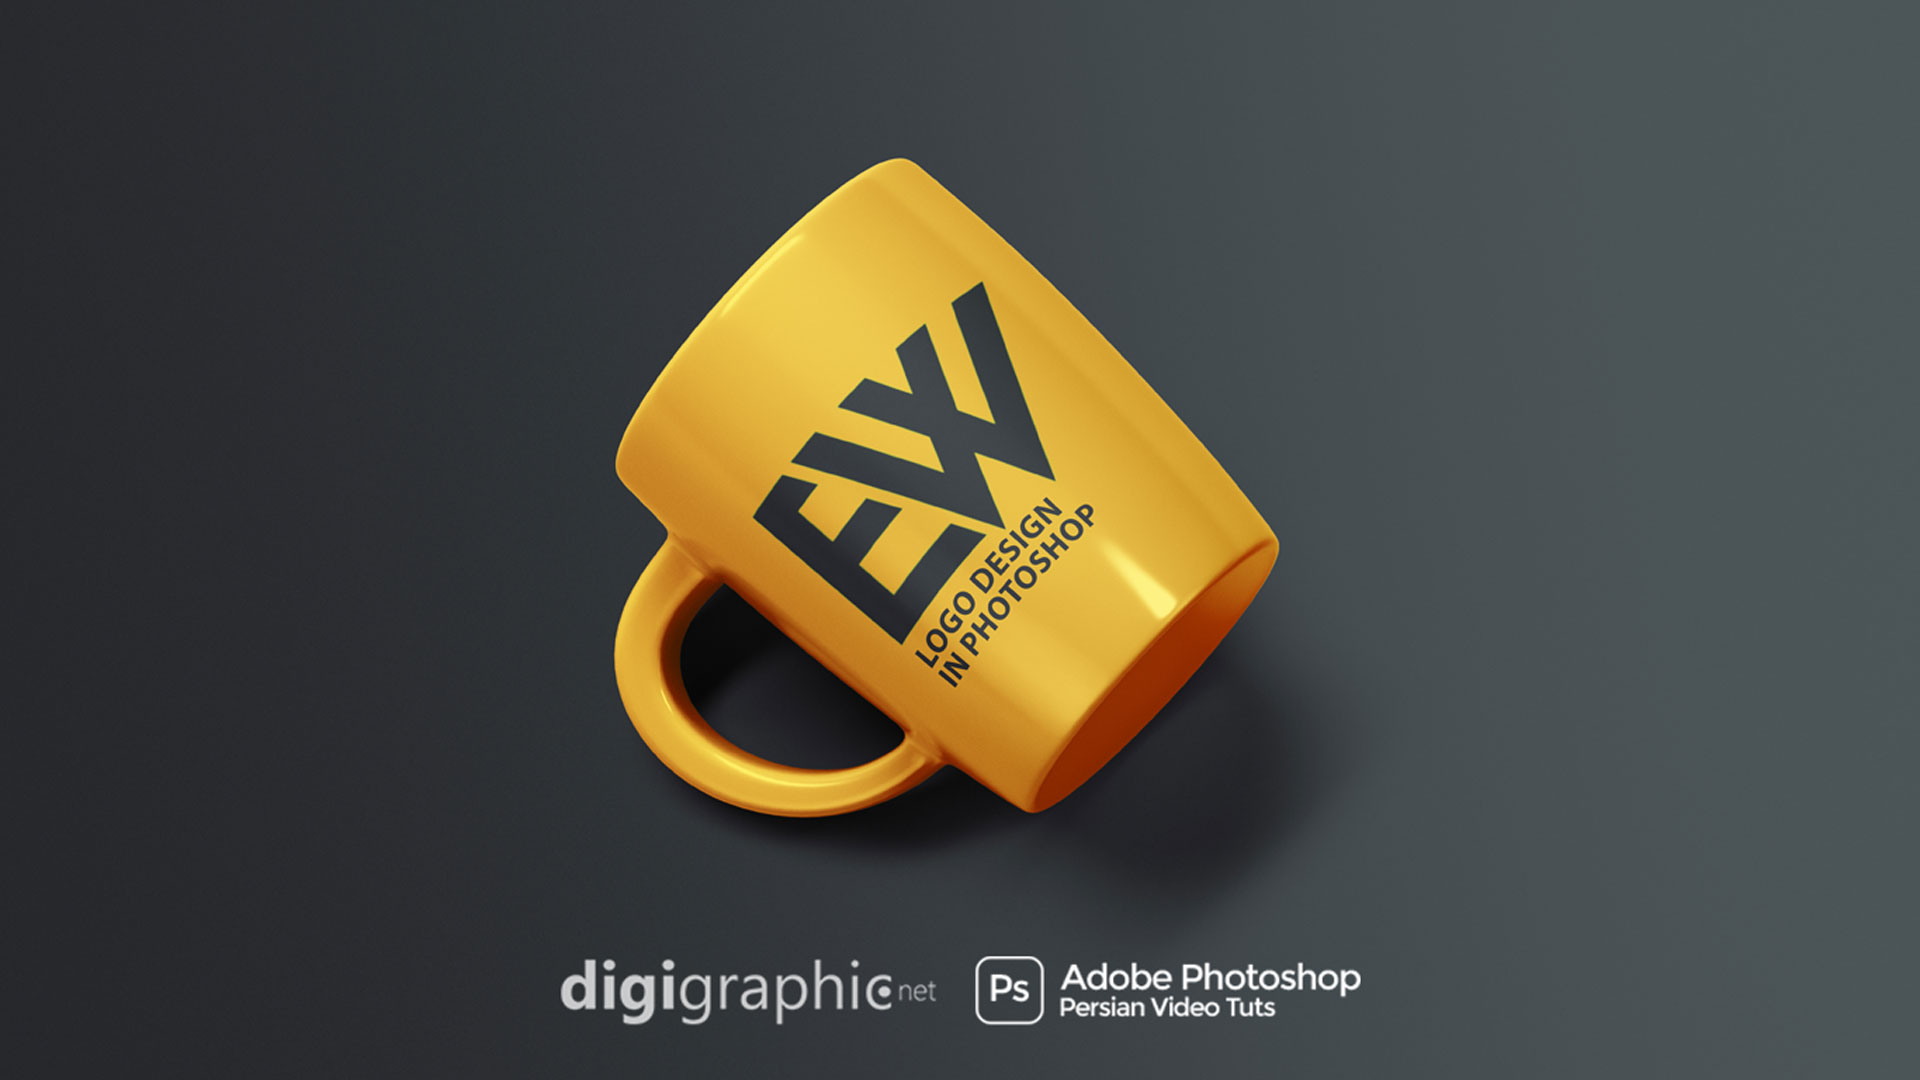 How To Make Easy Logo In Photoshop